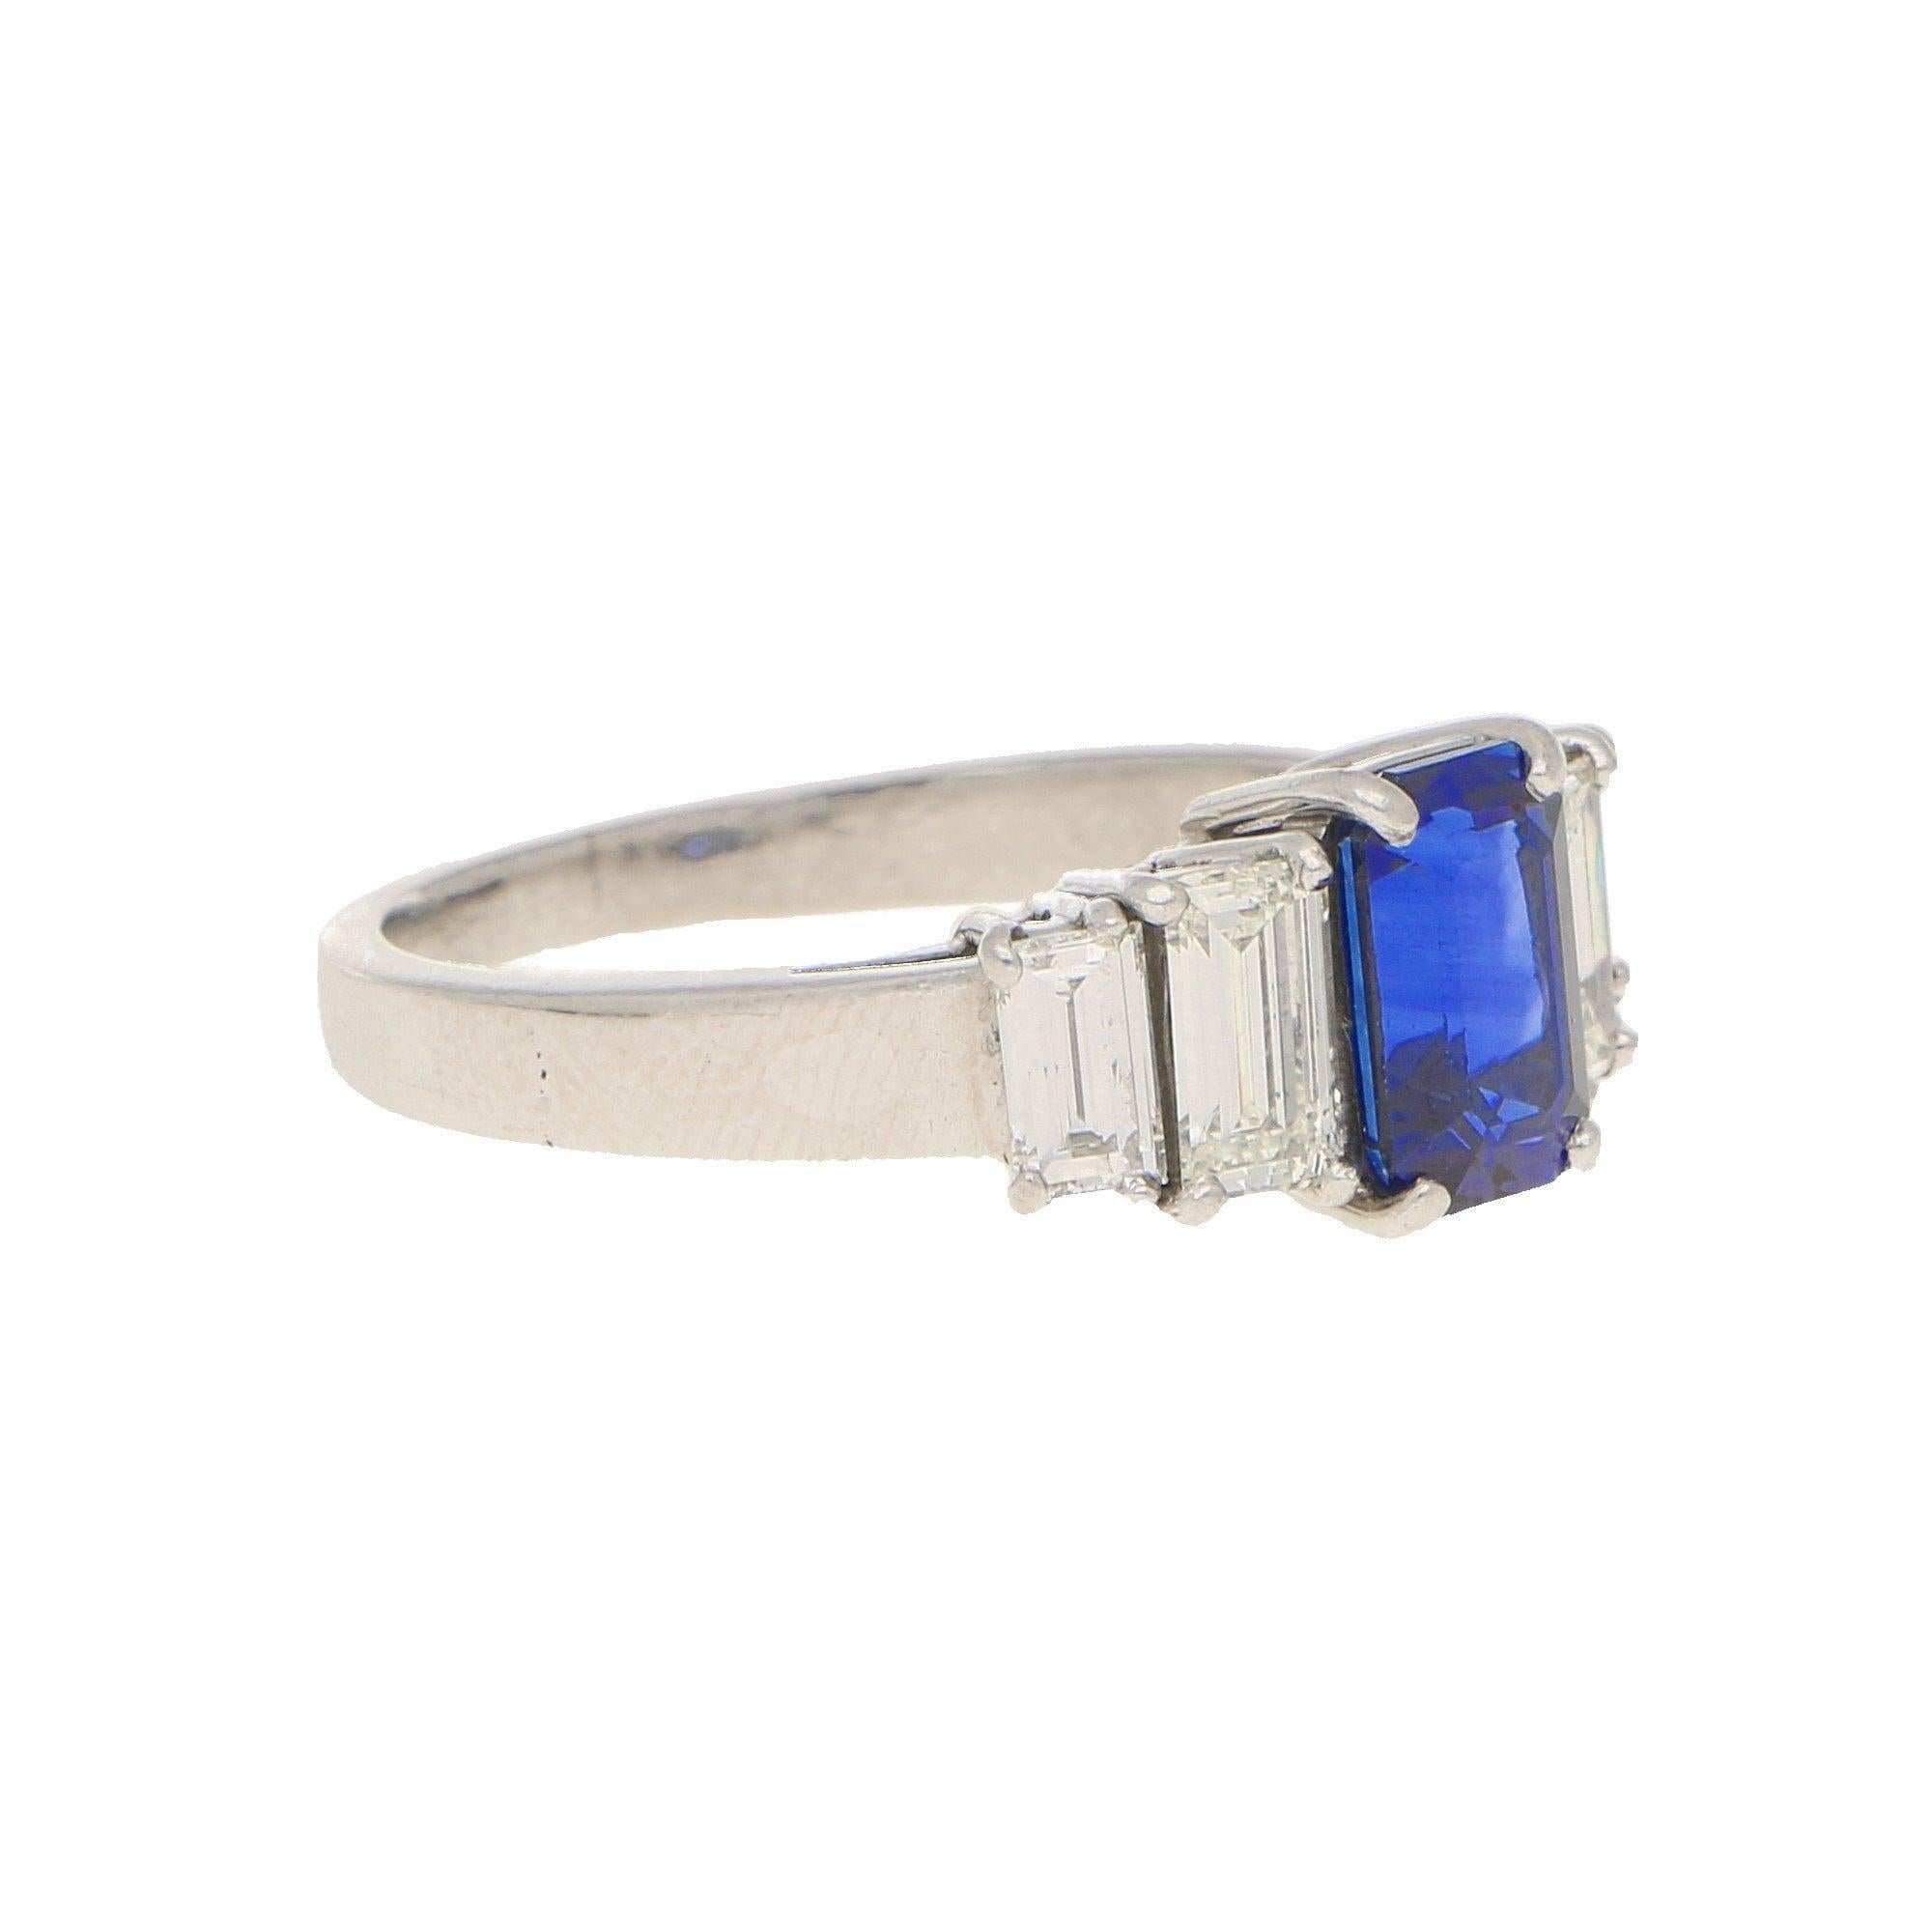 Emerald Cut Royal Blue Sapphire and Diamond Five Stone Ring Set in Platinum